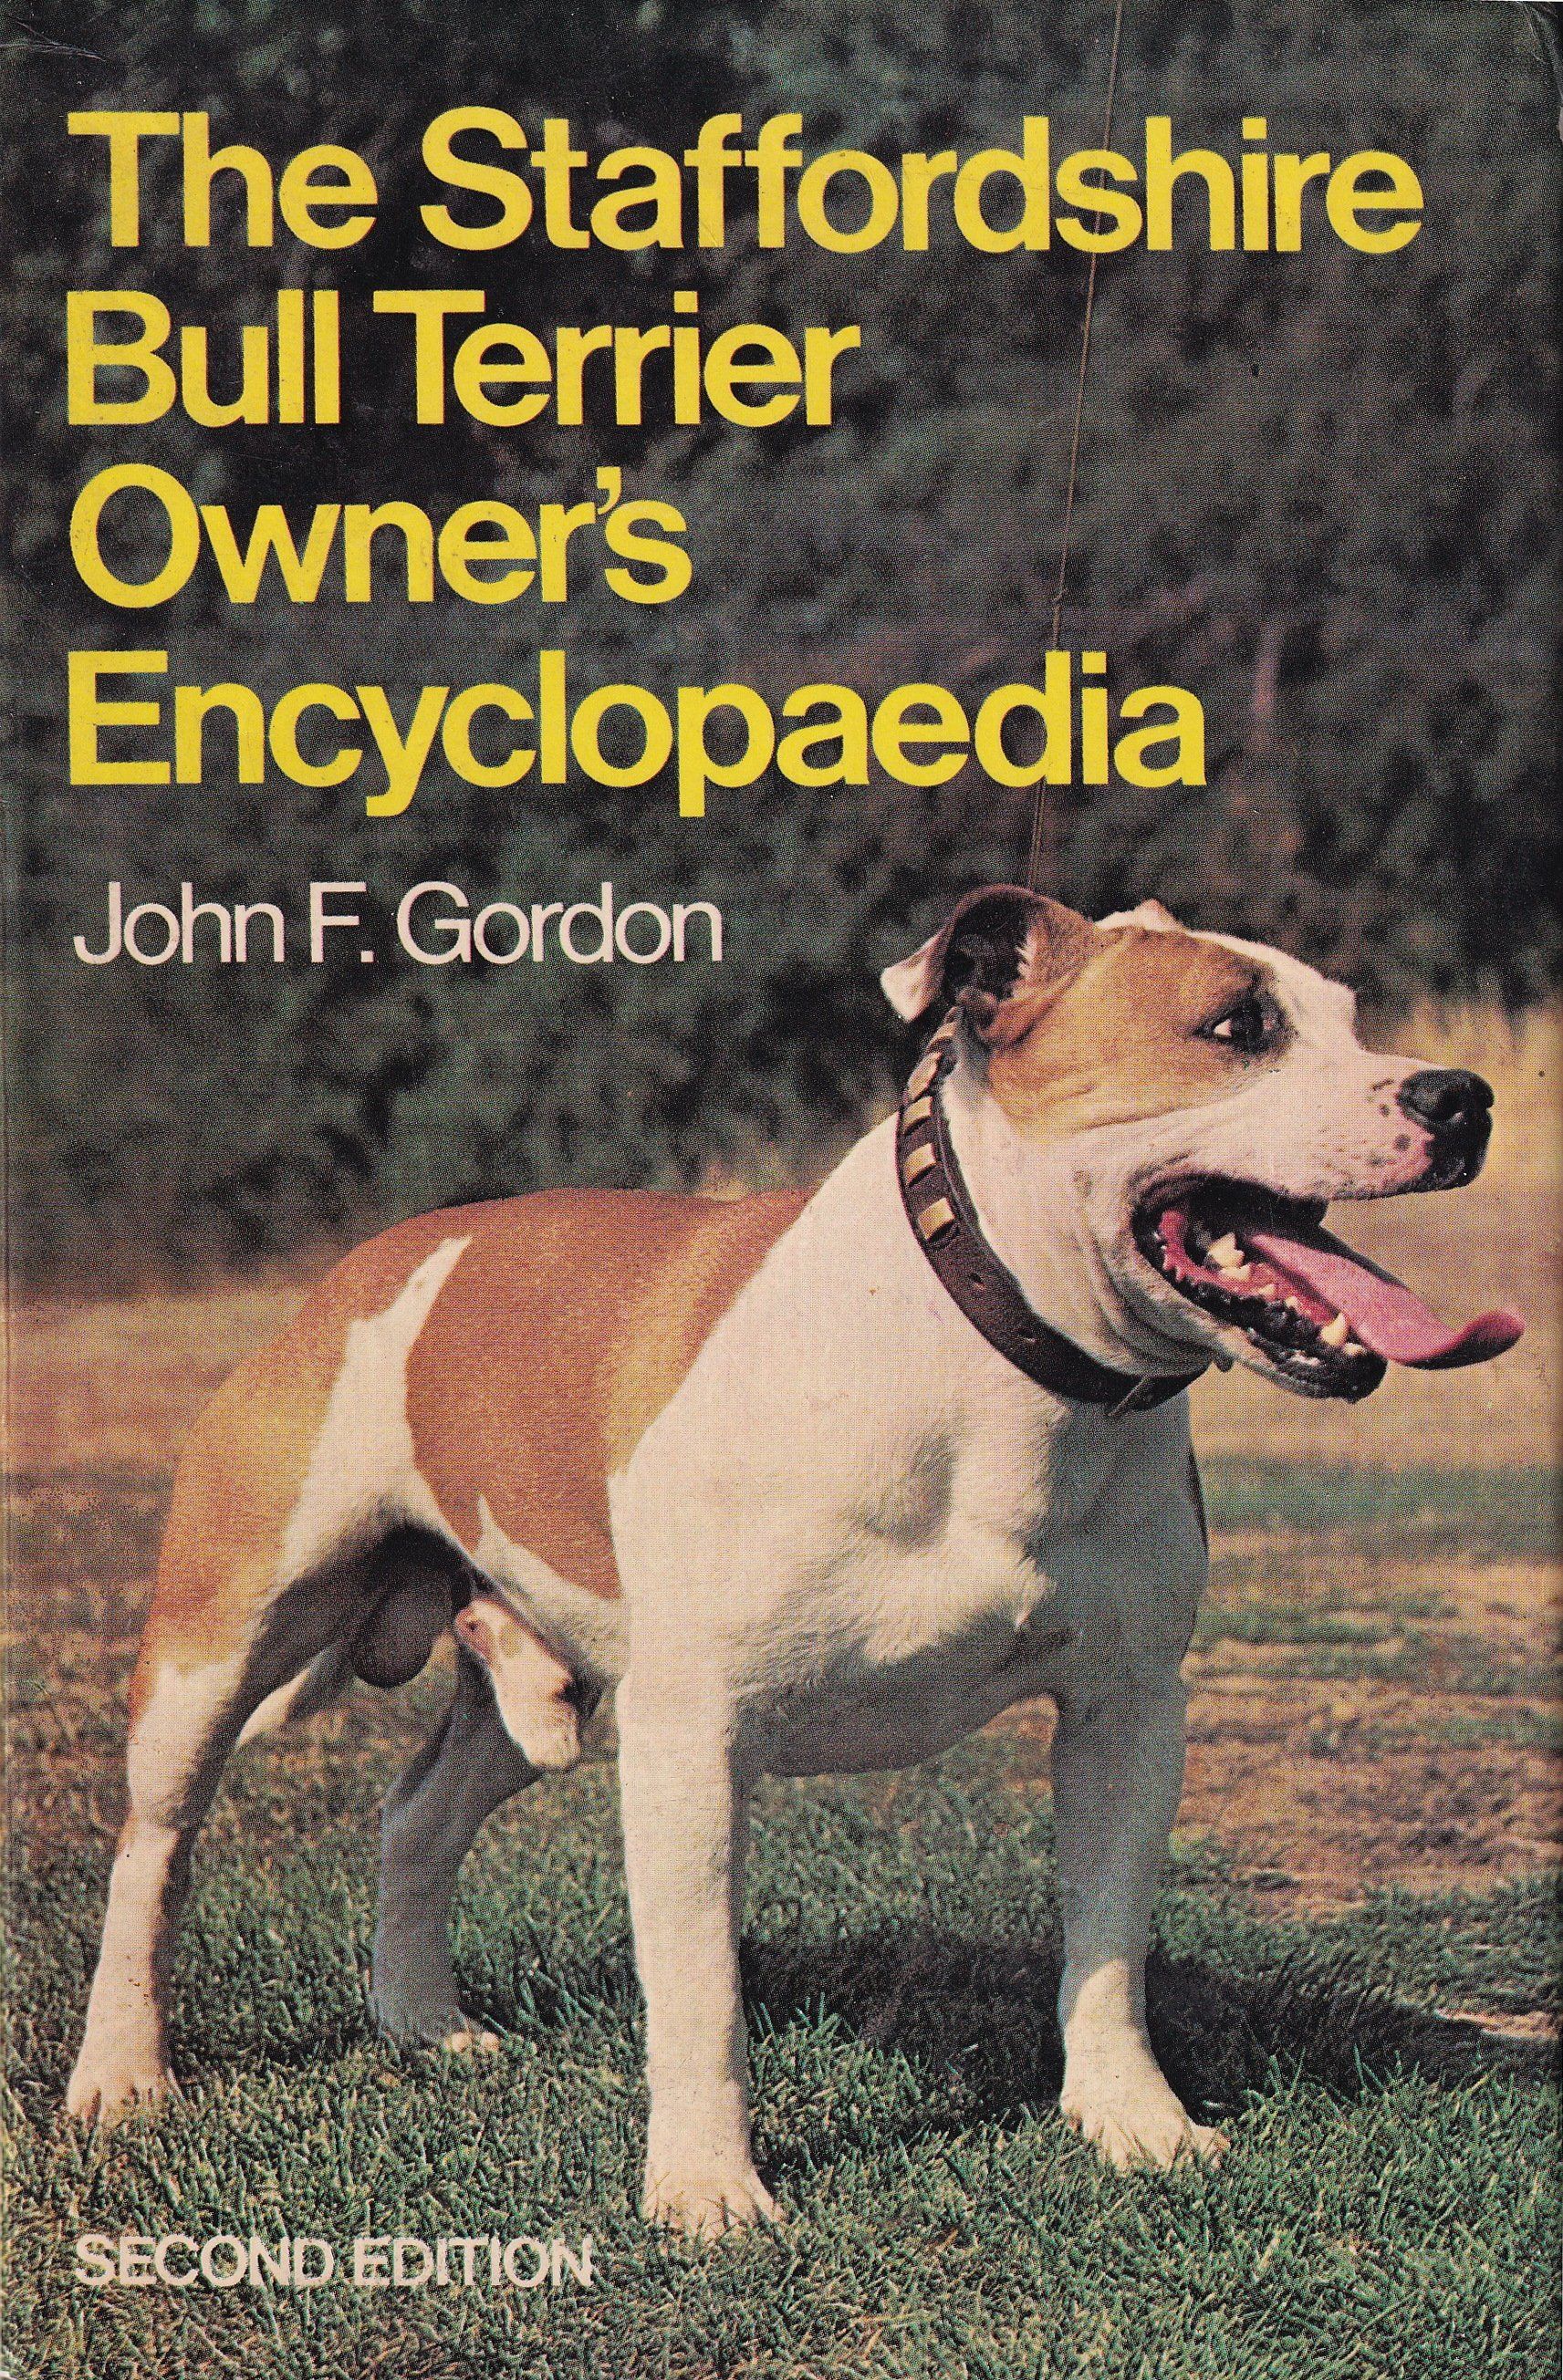 The Staffordshire Bull Terrier Owner's Encyclopaedia